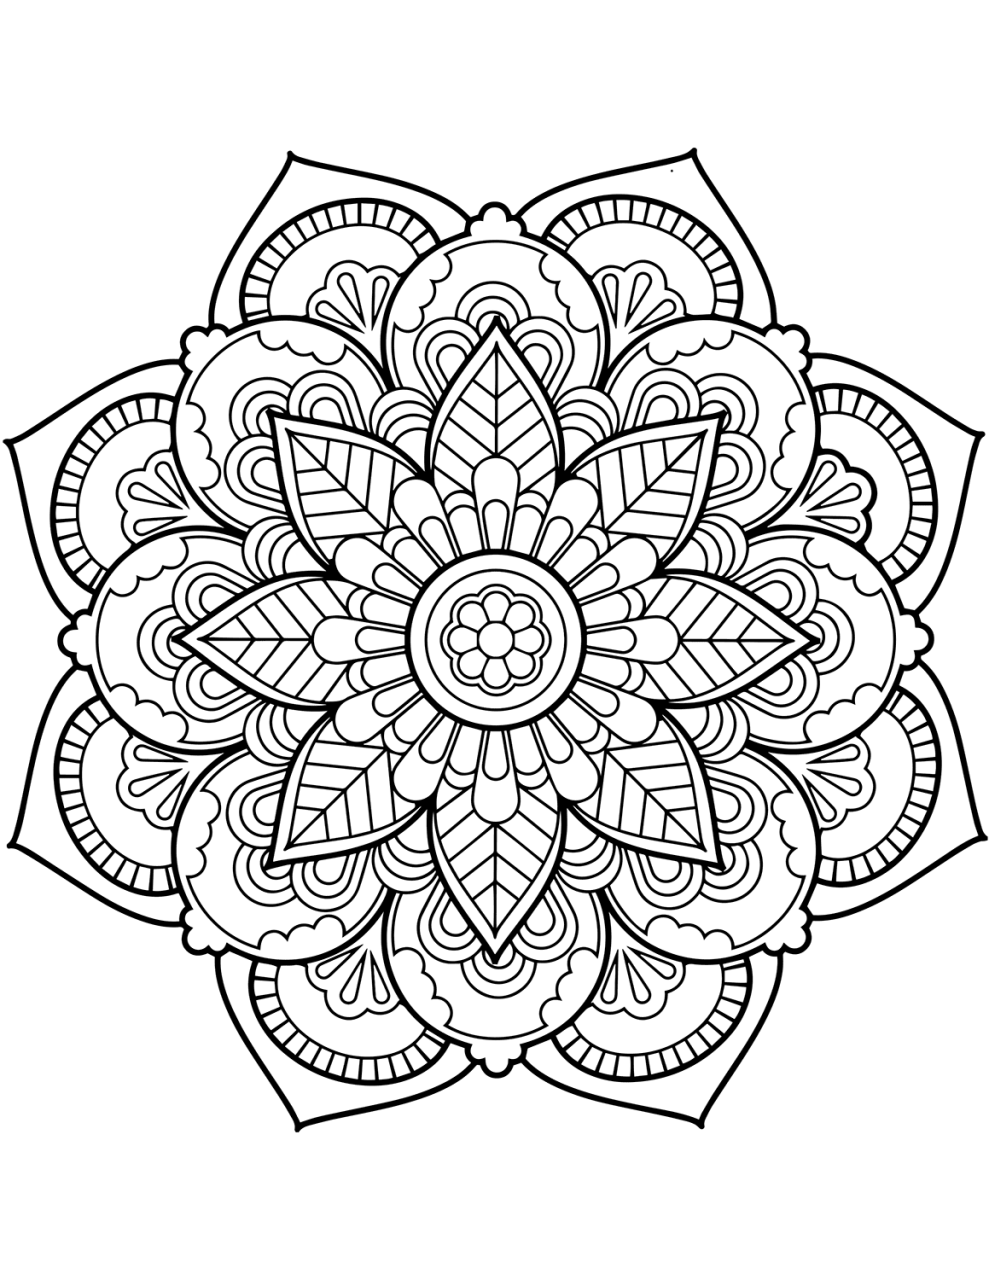 Coloring Page Piggy Bank